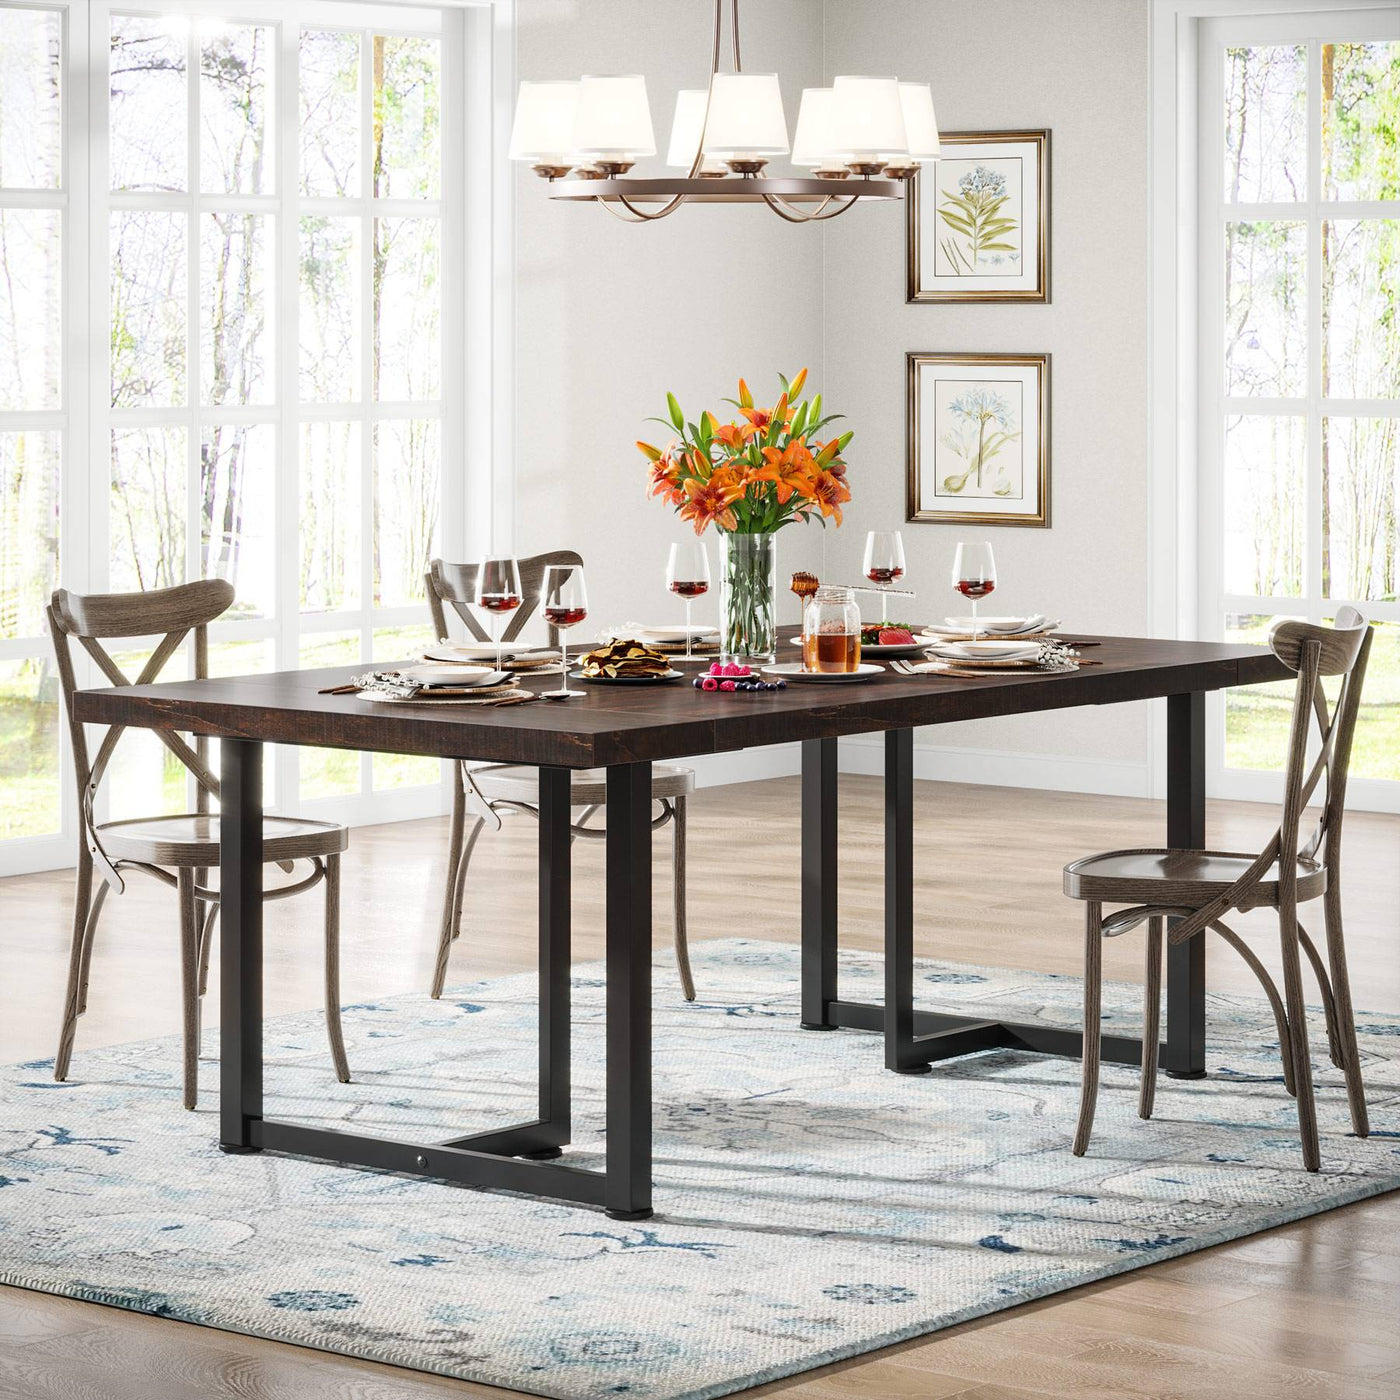 Henley Farmhouse Dining Table | Industrial Rectangular Wooden Kitchen Table for 4-6 People